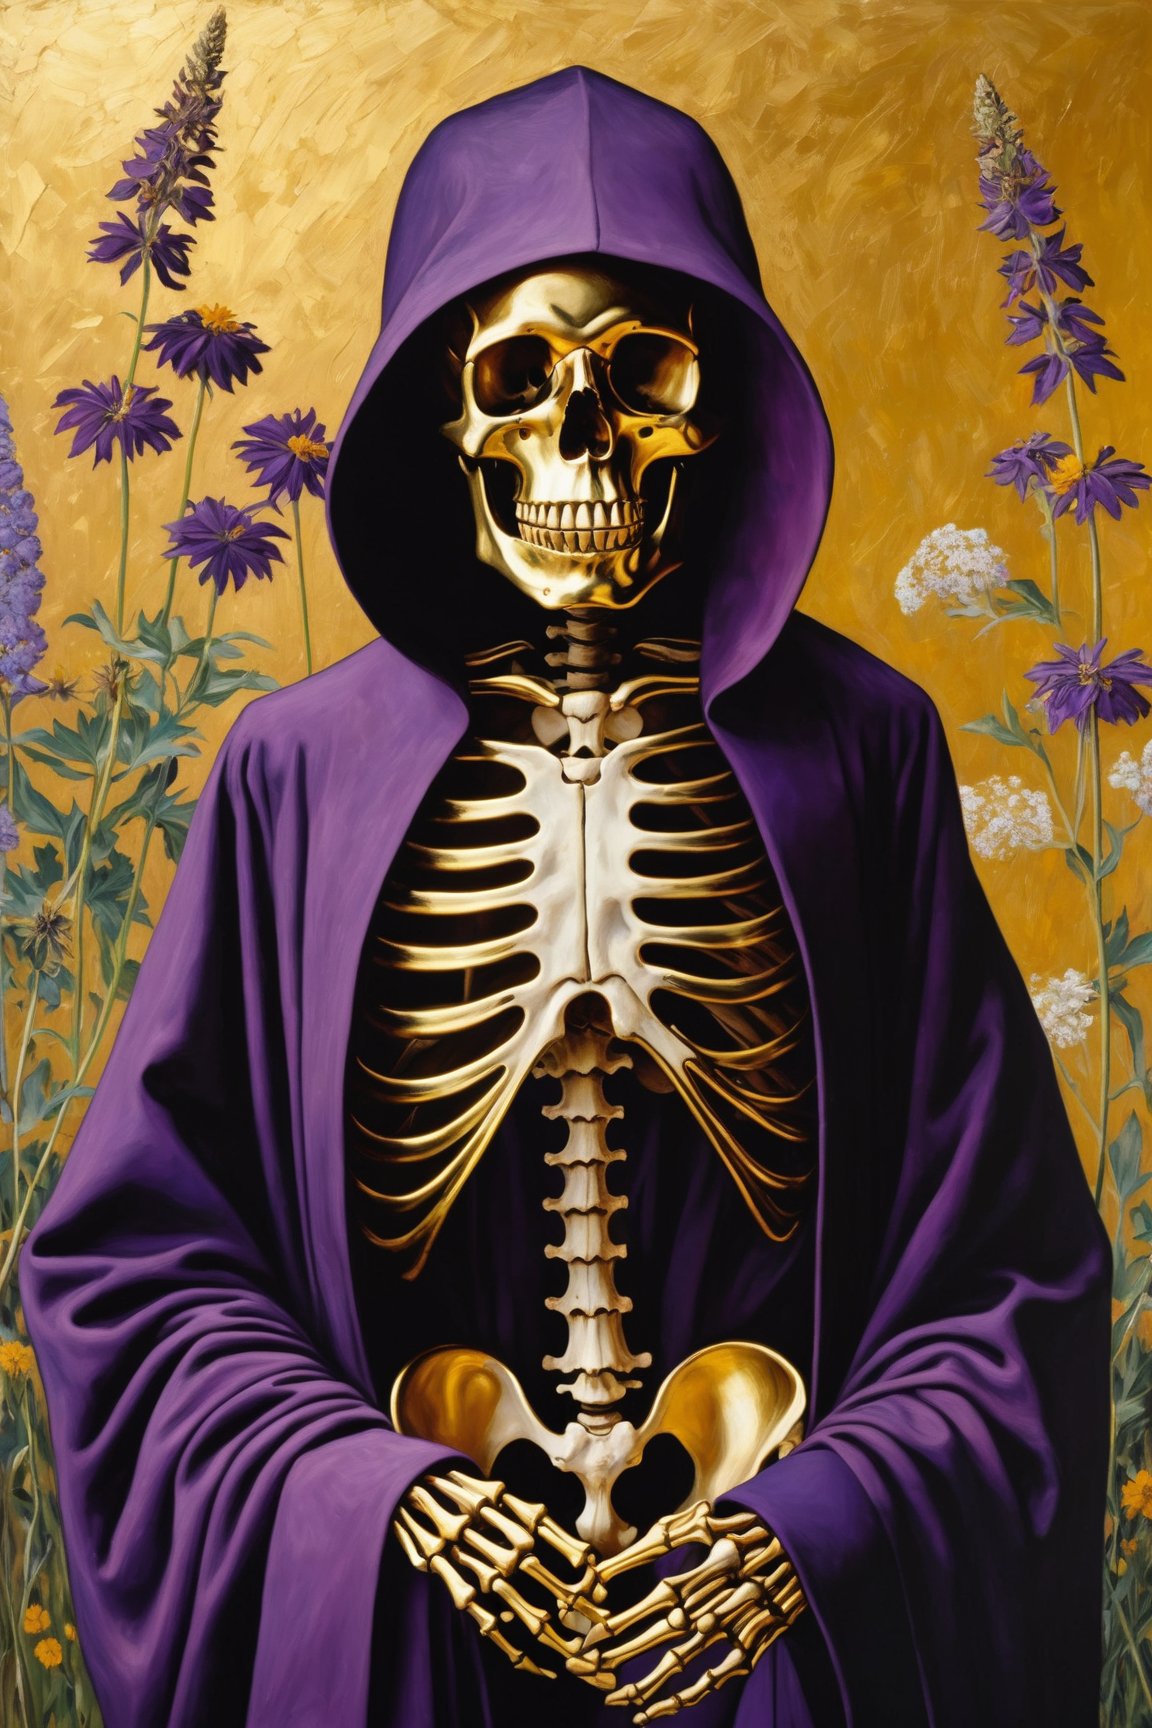 masterpiece, skeleton in a dark purple robe,hooded, light gold- colored beige background wildflowers, Natural Lighting Artists: Monet, Rene Magritte, Sandro Botticelli, Colors: Gold and purple